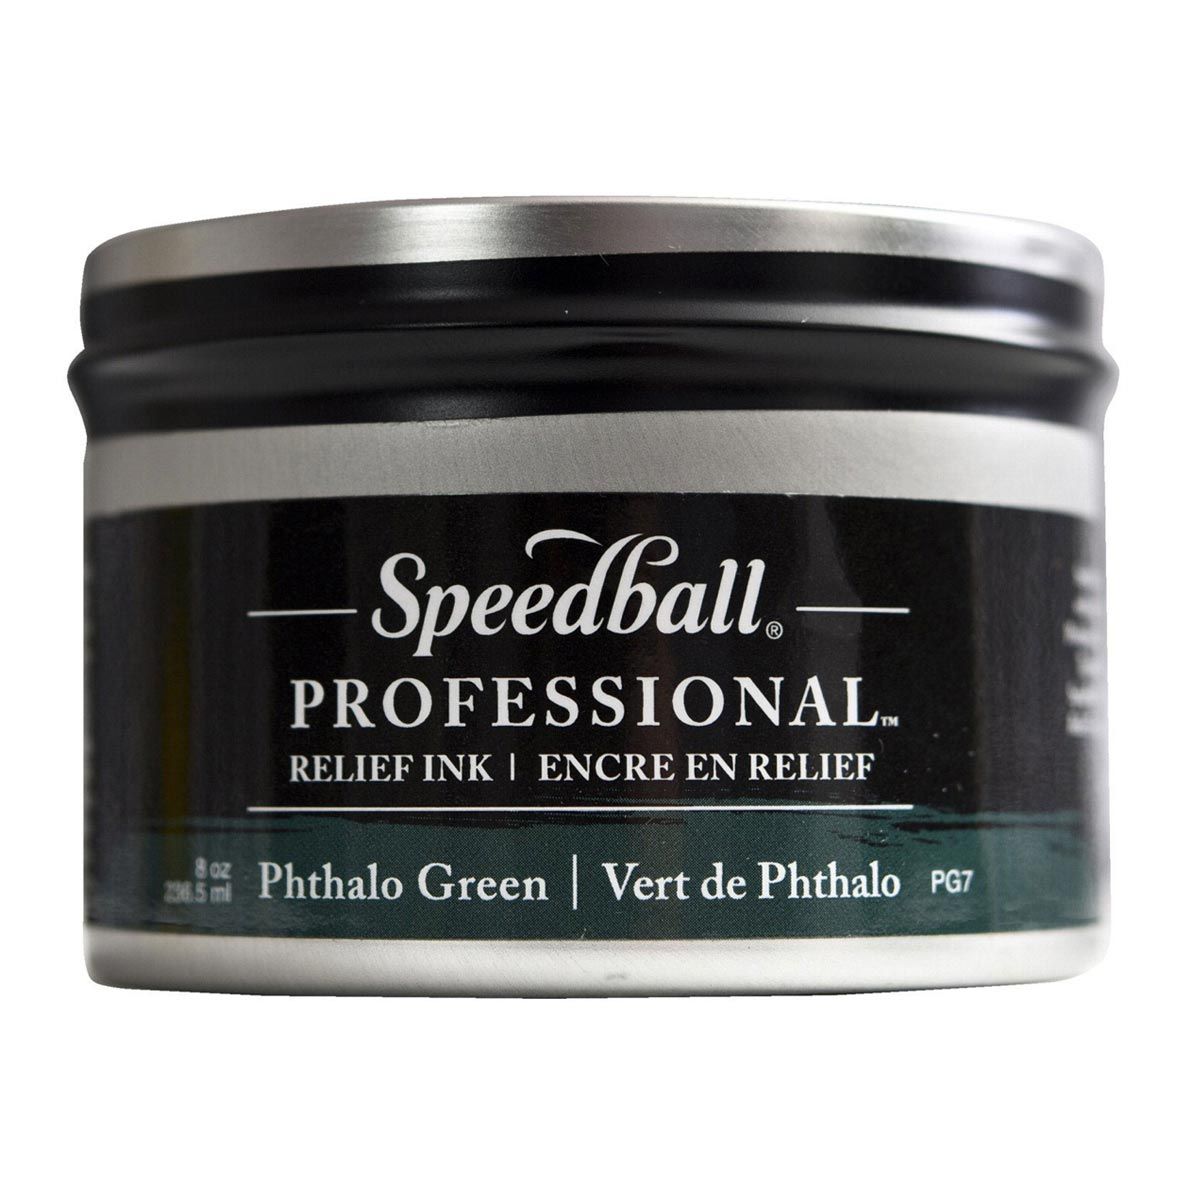 Speedball Professional Relief Ink - Phthalo Green 8 oz